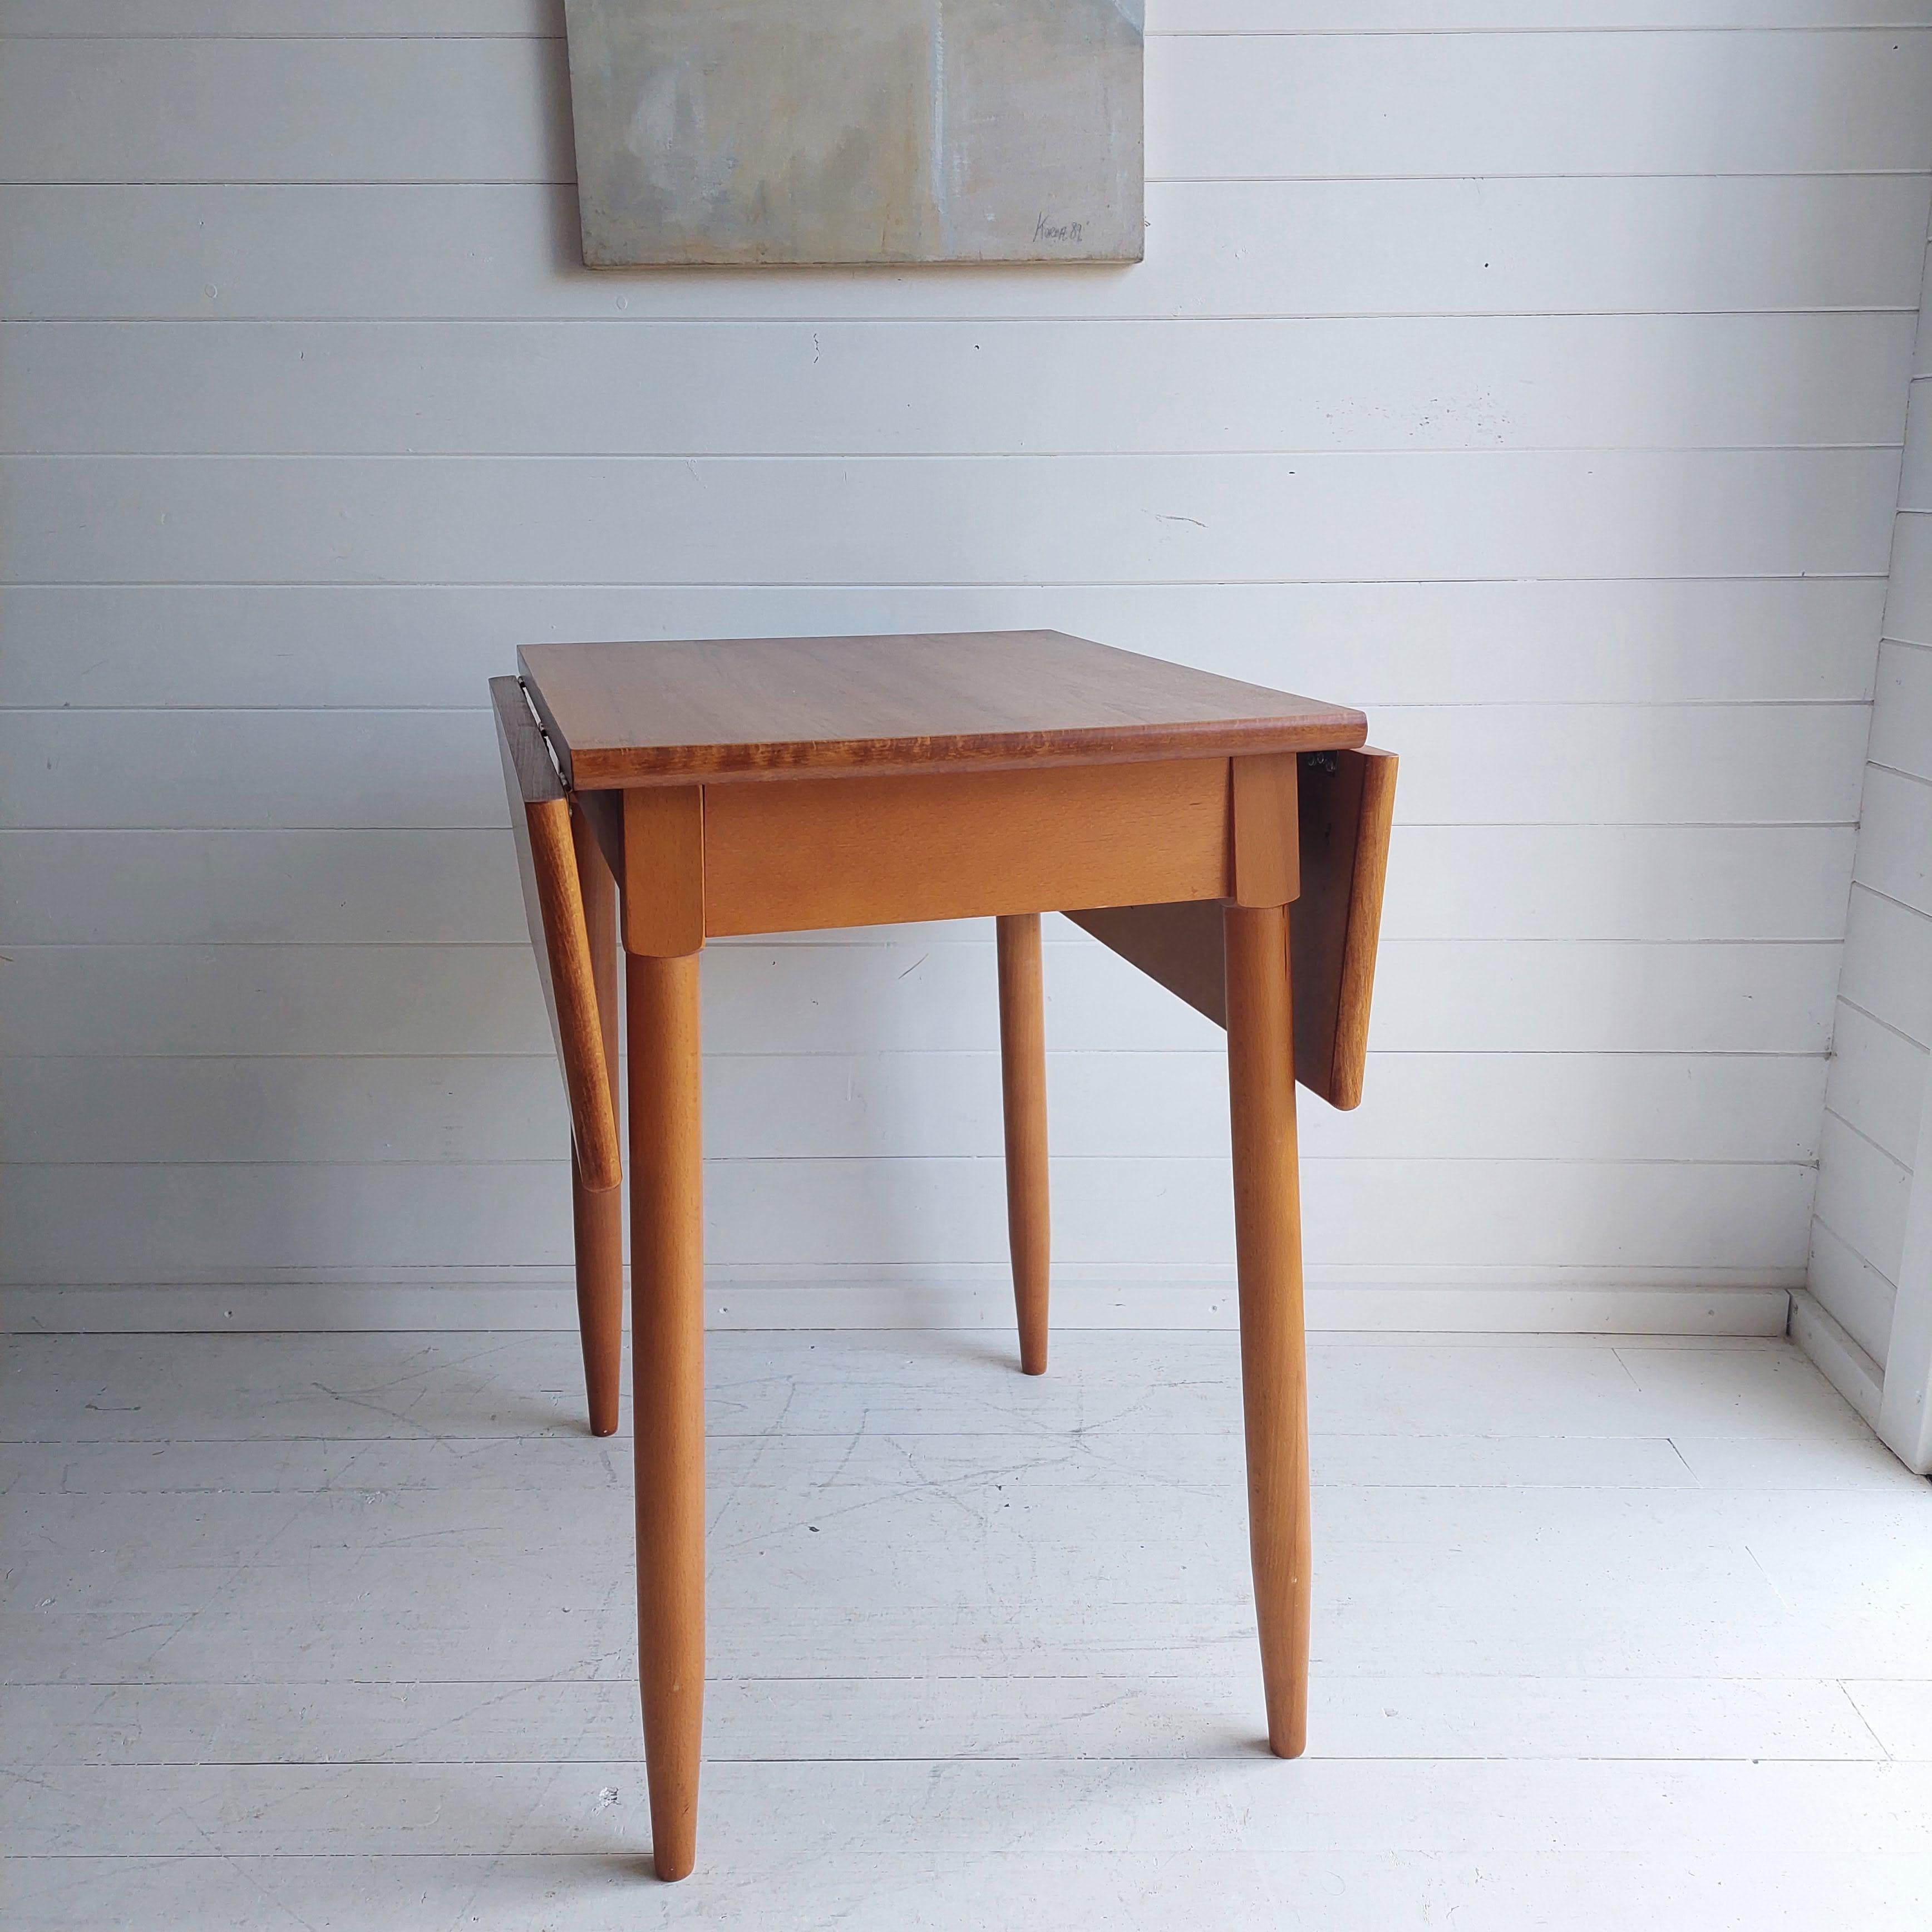 This is a small wooden drop leaf kitchen table probably dating from the 1980s. 
Vintage teak effect drop leaf table with beech frame and legs that seats 2-4 people most probably from the Czech Republic 

The table has wooden legs and the top